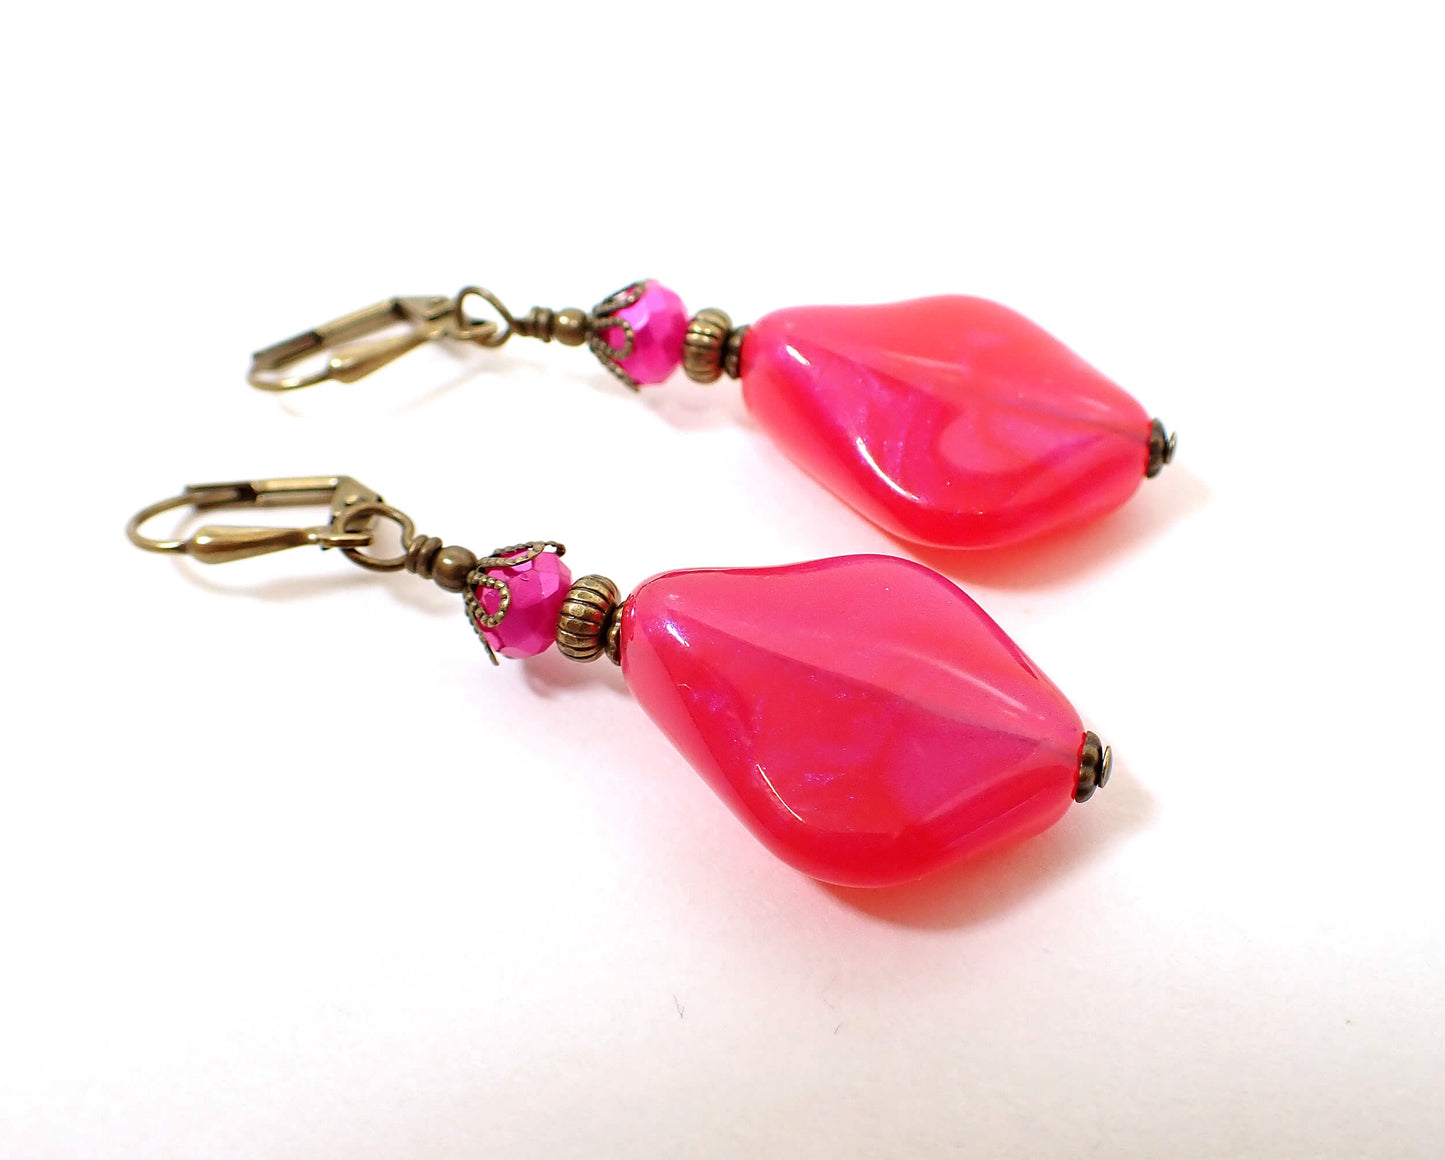 Antiqued Brass Handmade Color Shift Bright Pink Lucite Earrings Hook Lever Back or Clip On